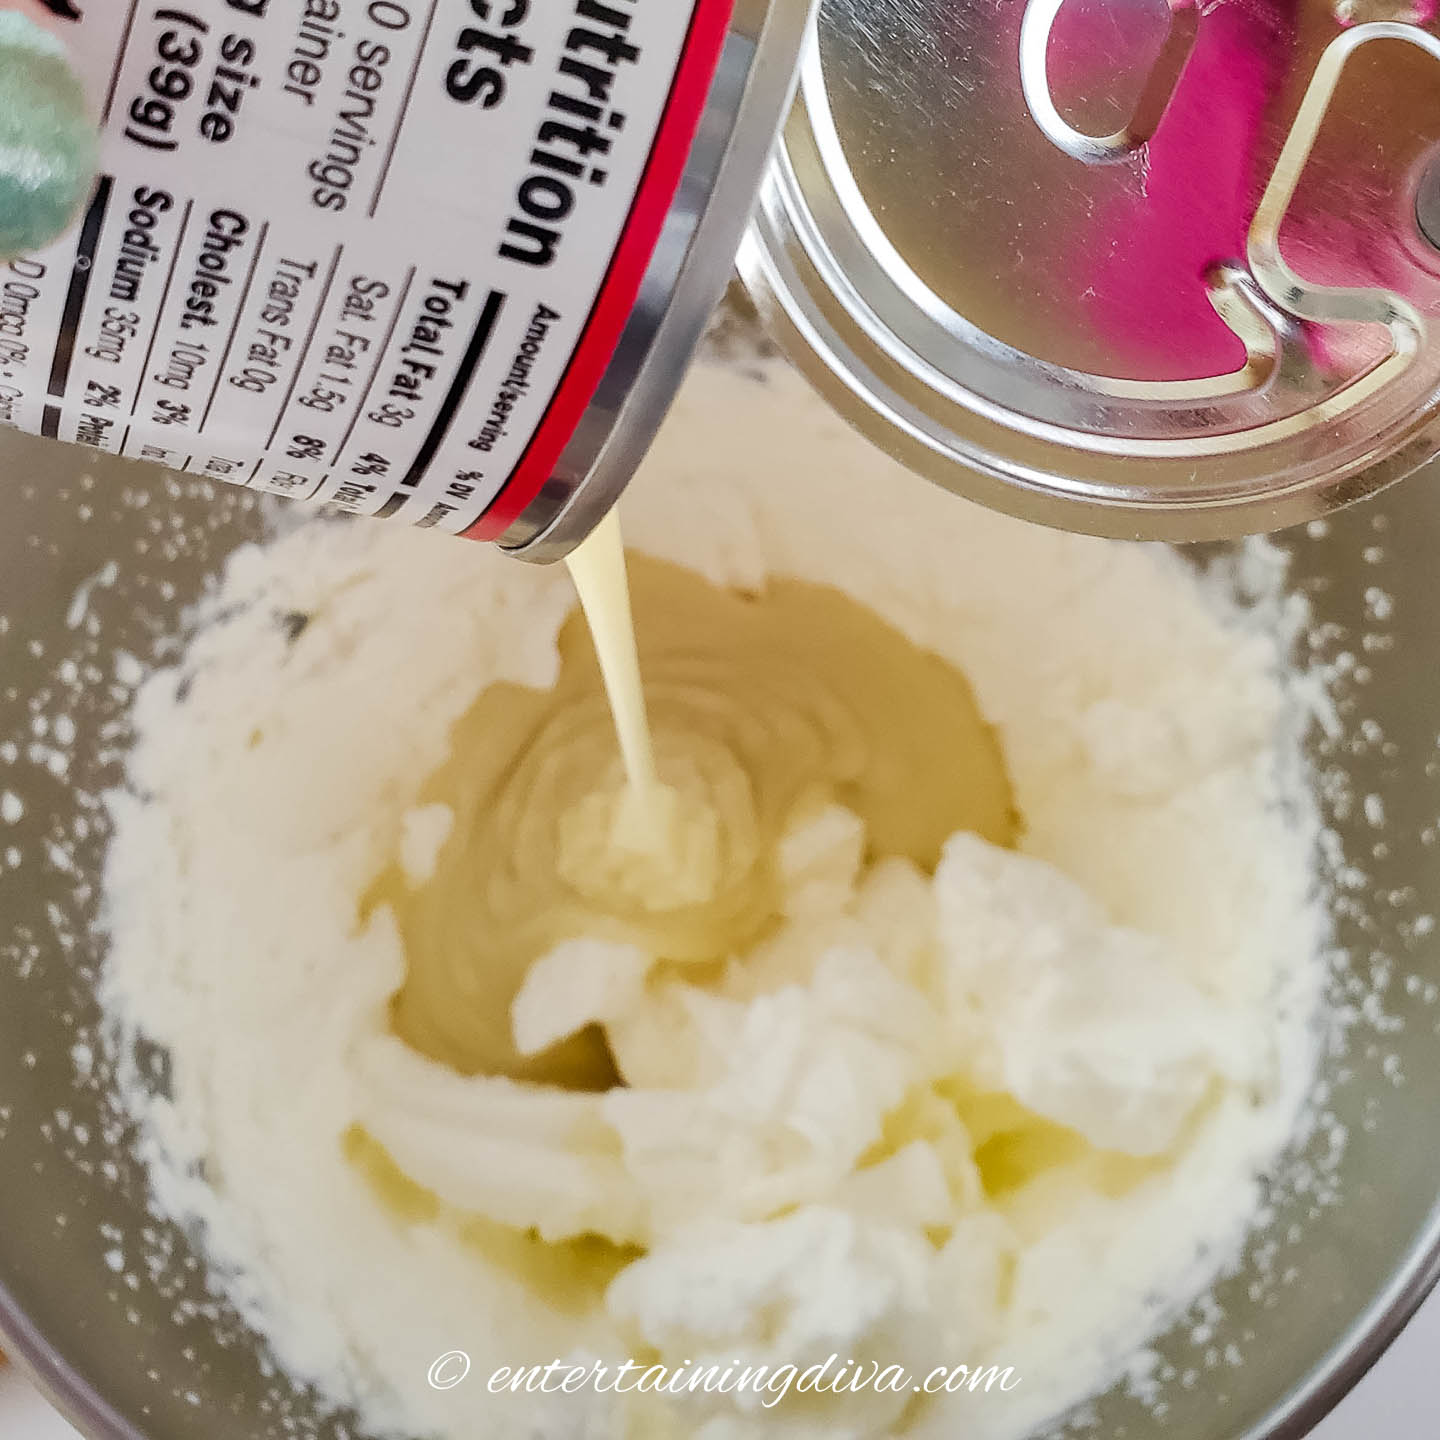 sweetened condense milk being poured into a bowl of whipped cream